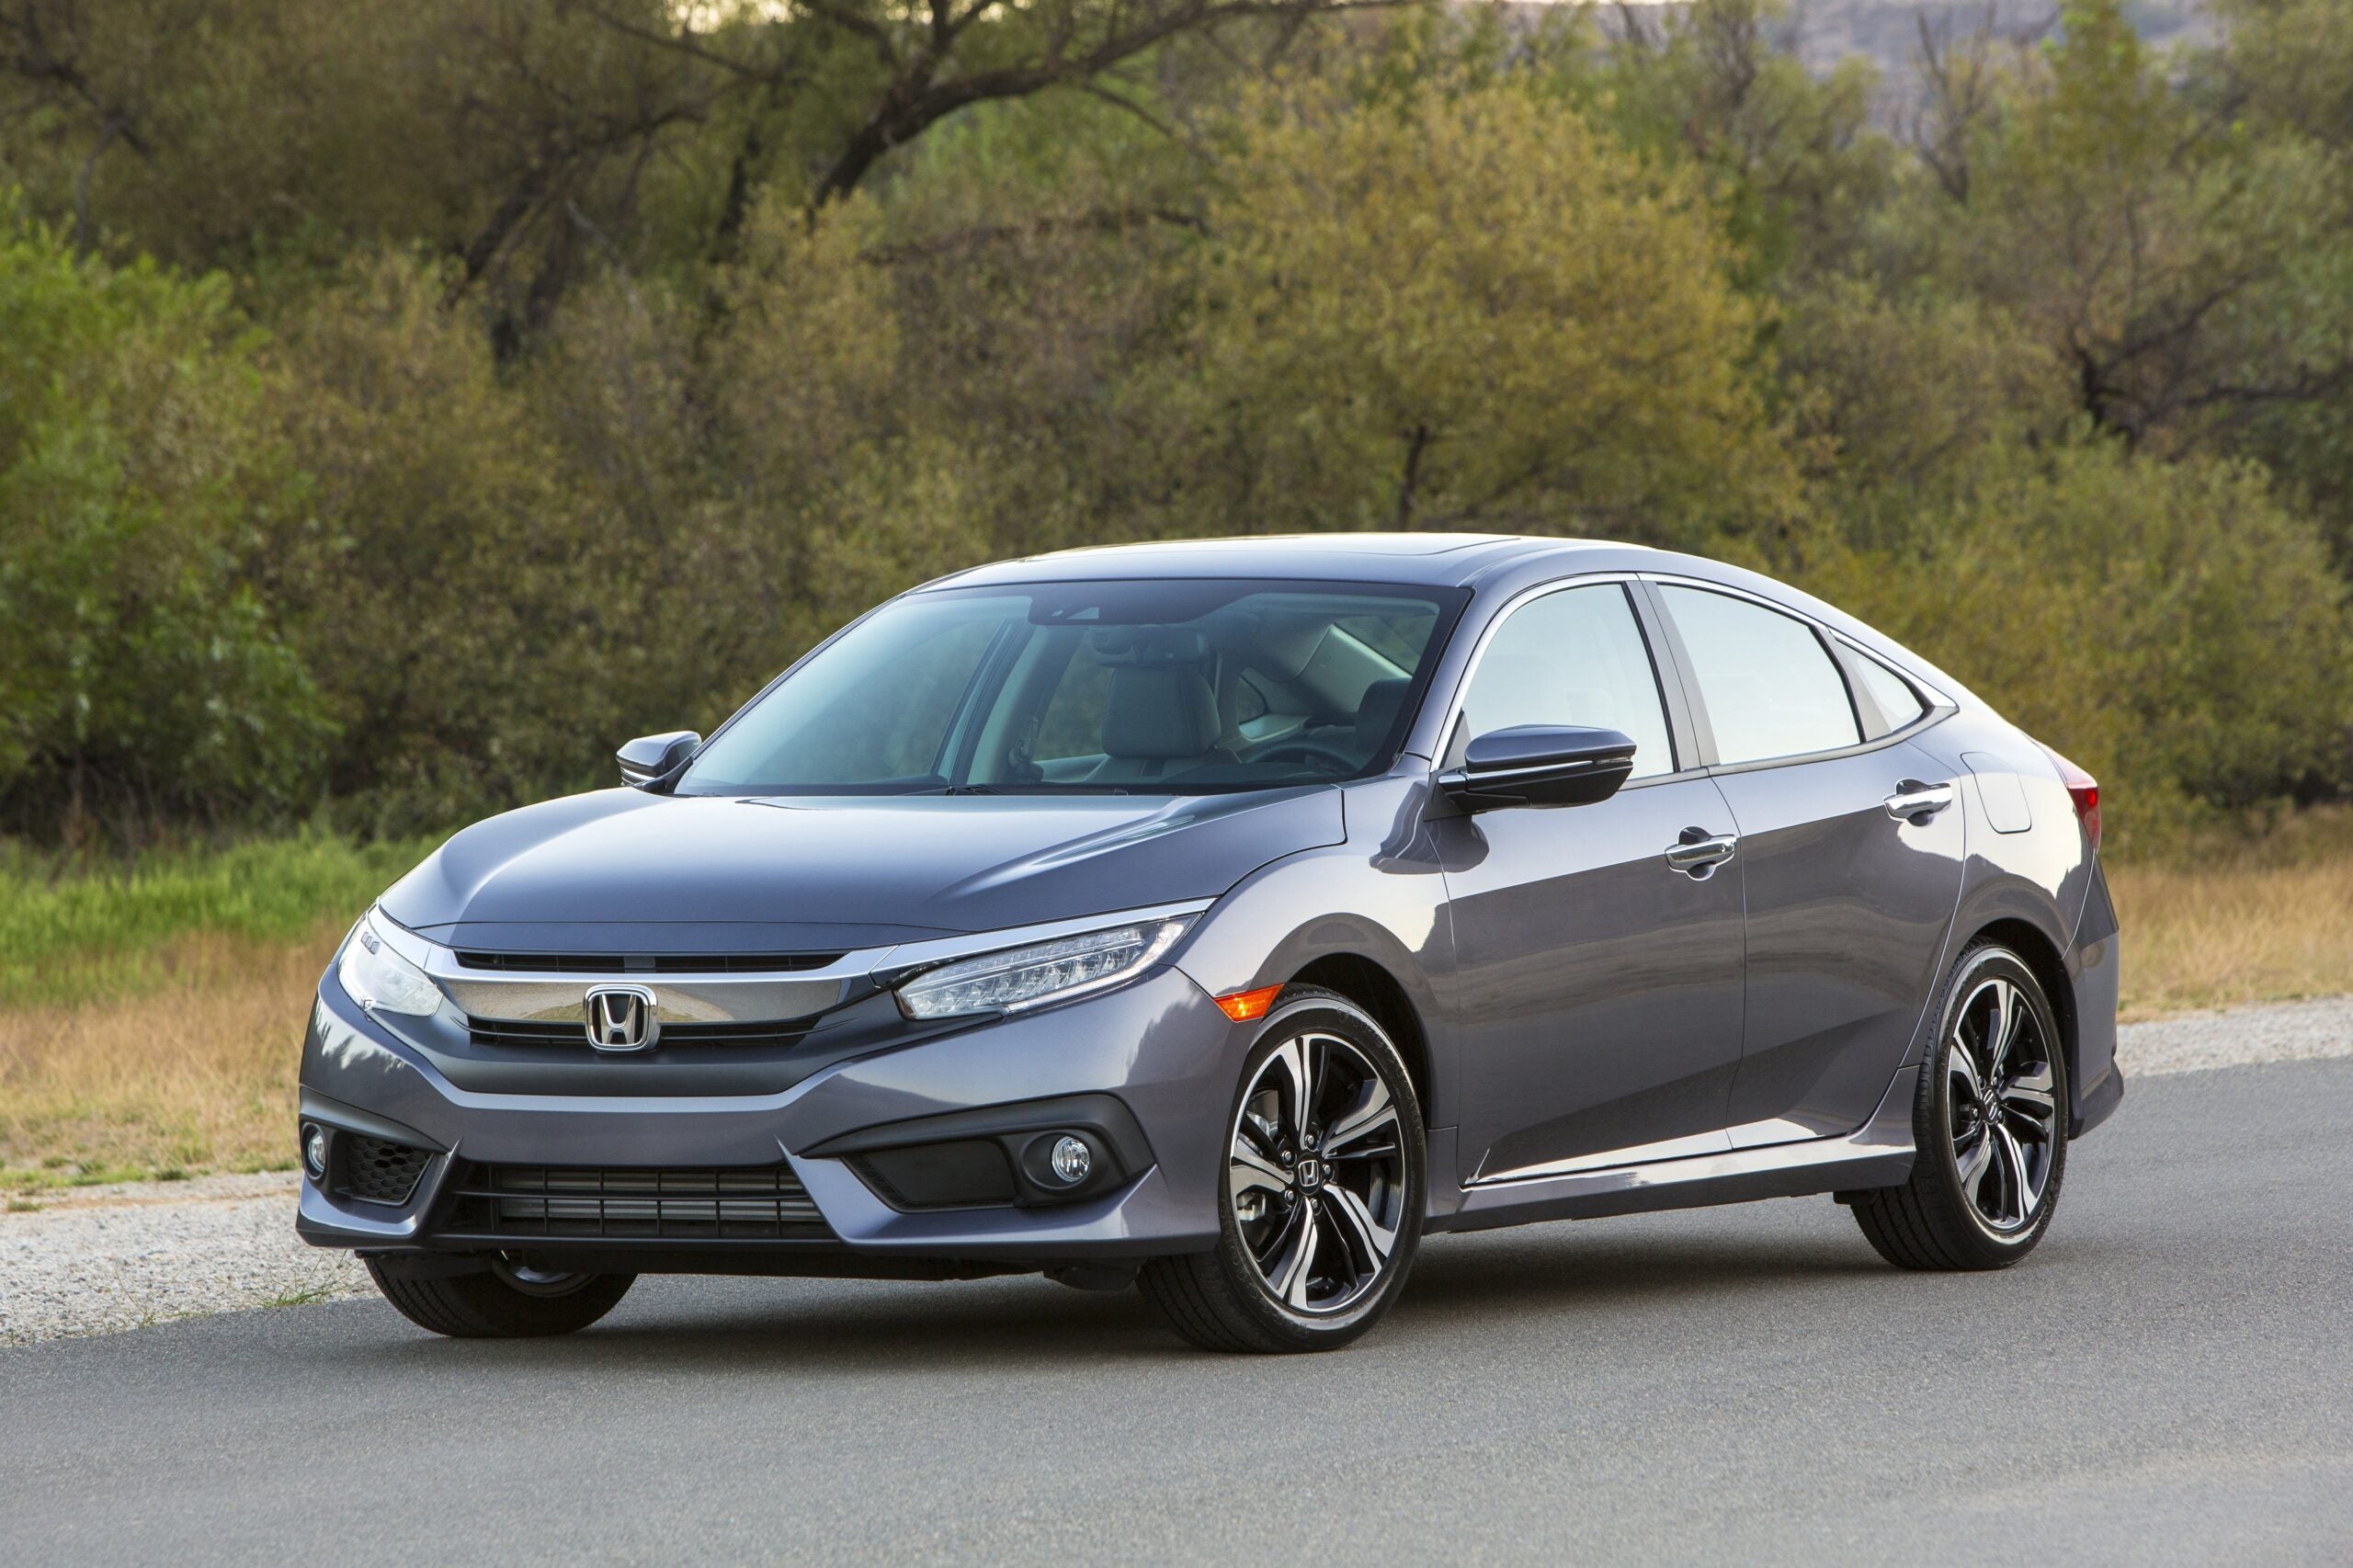 Hilarisch gebruik metro What the experts say about the 2018 Honda Civic